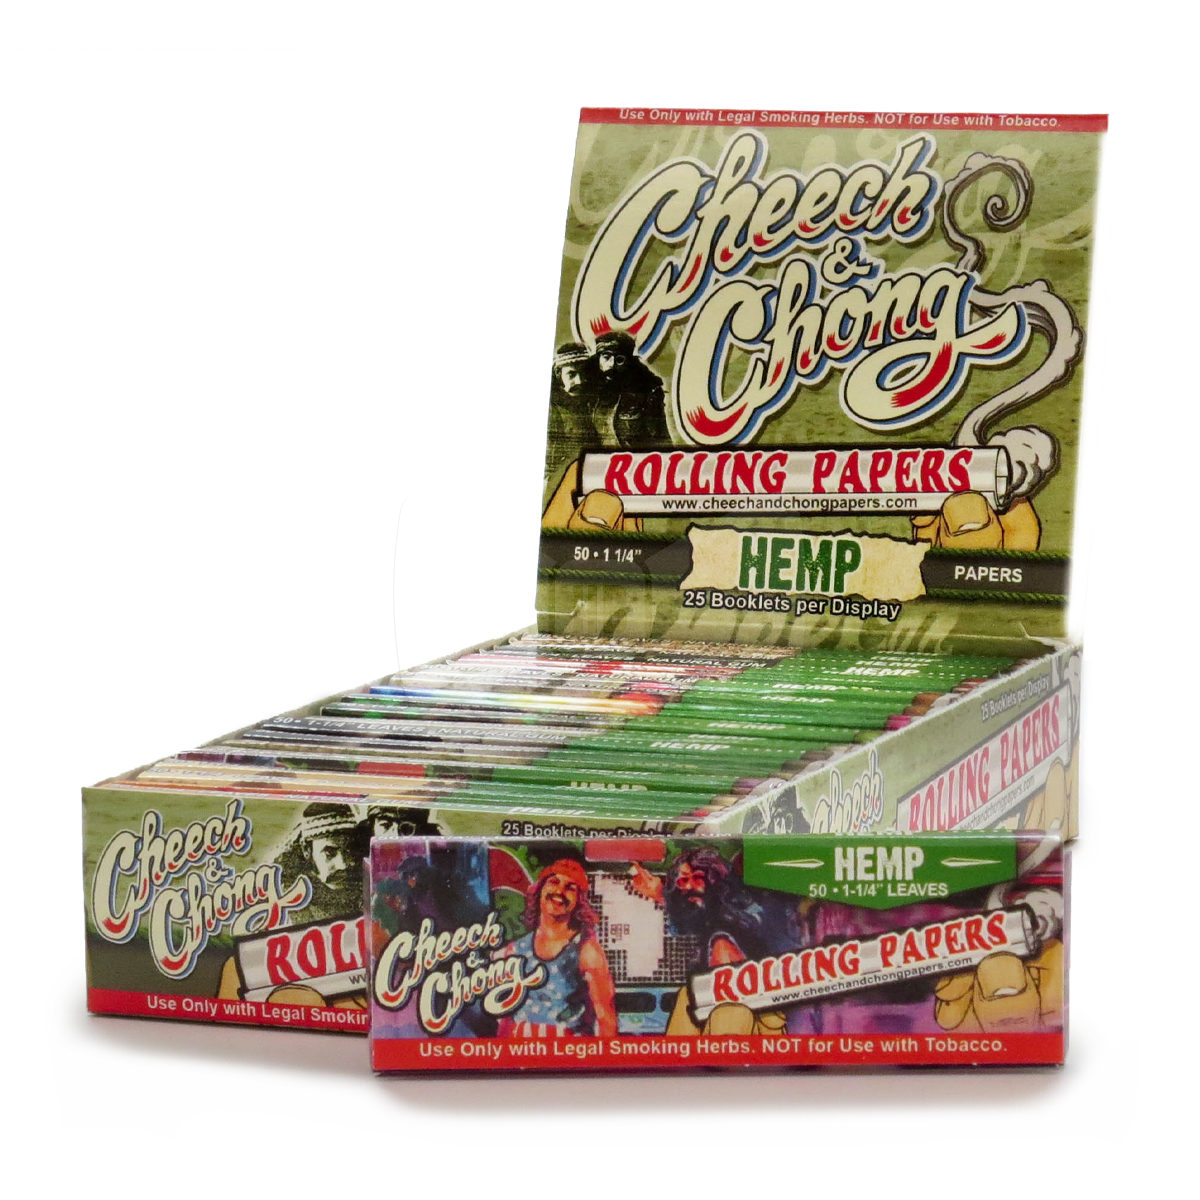 Cheech and Chong 1 1/4 Hemp Rolling Papers 1 Pack